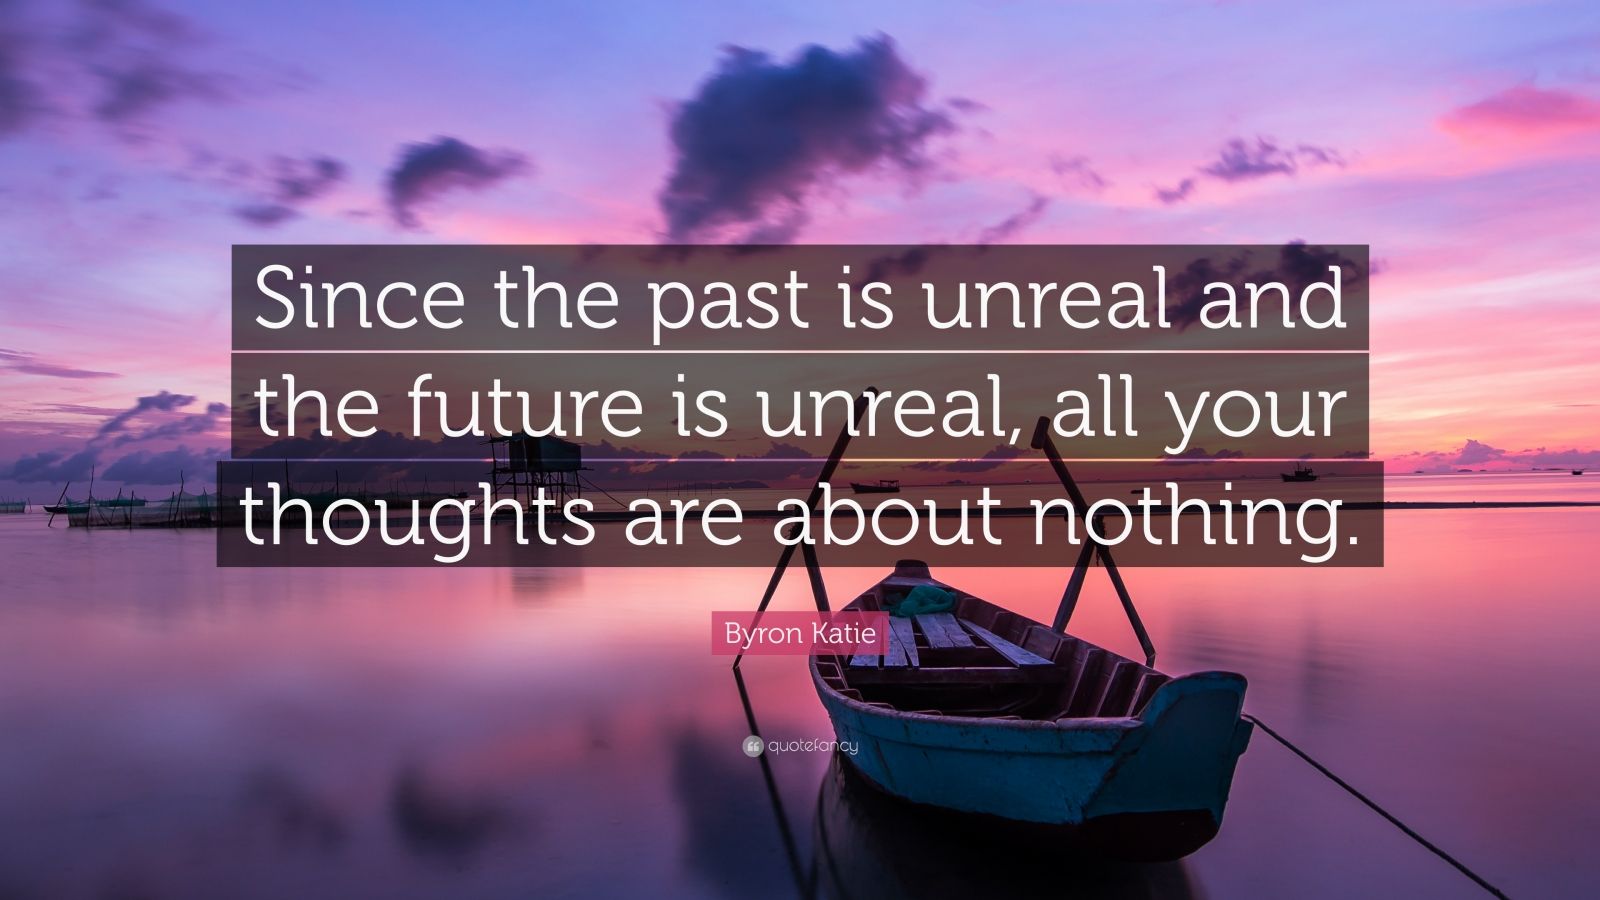 Byron Katie Quote: “Since the past is unreal and the future is unreal ...